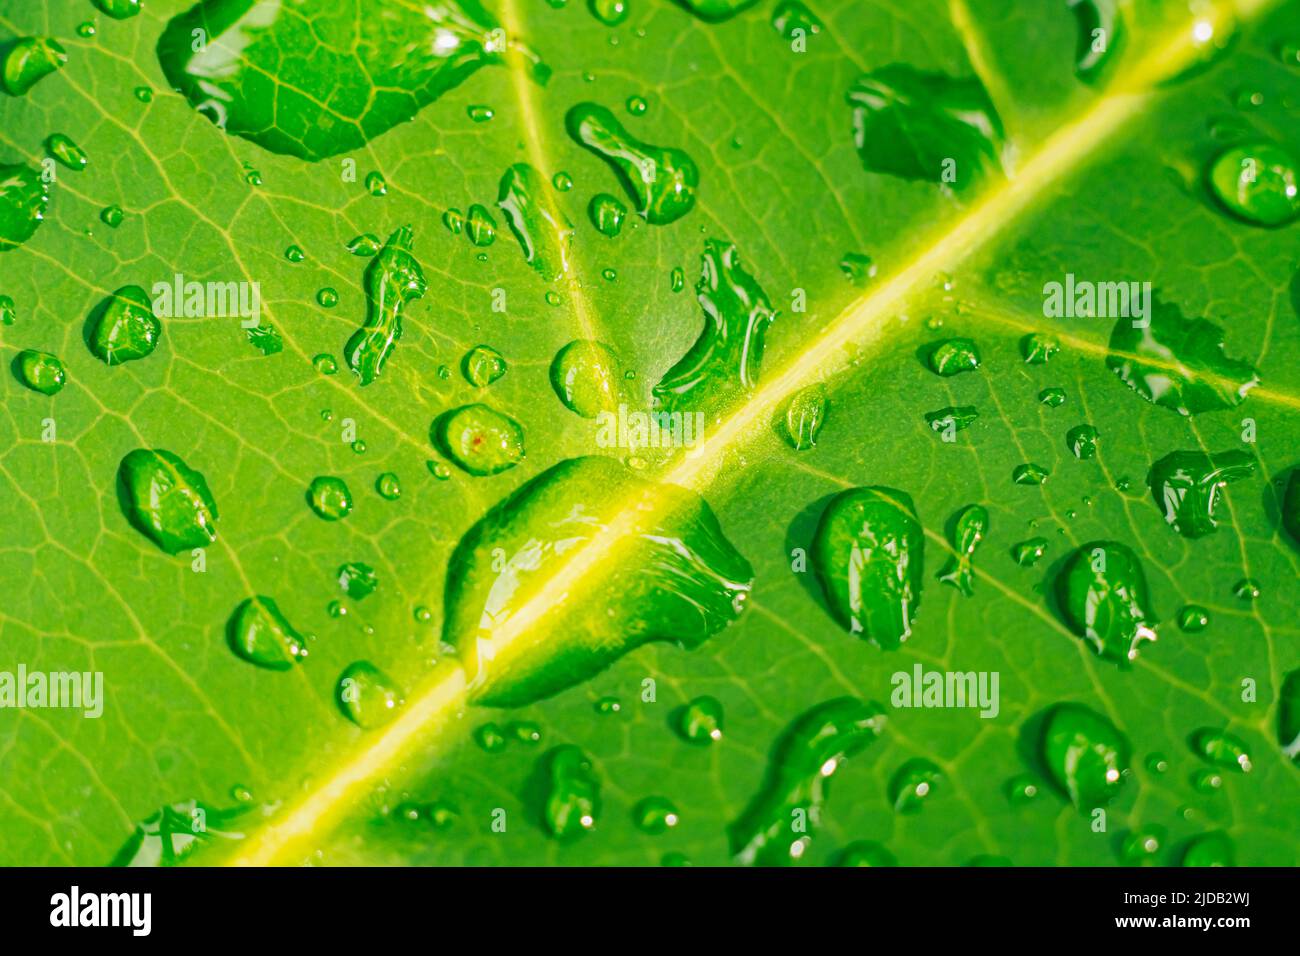 Dew #DewDrops | Water drop photography, Water pictures, Dew drops